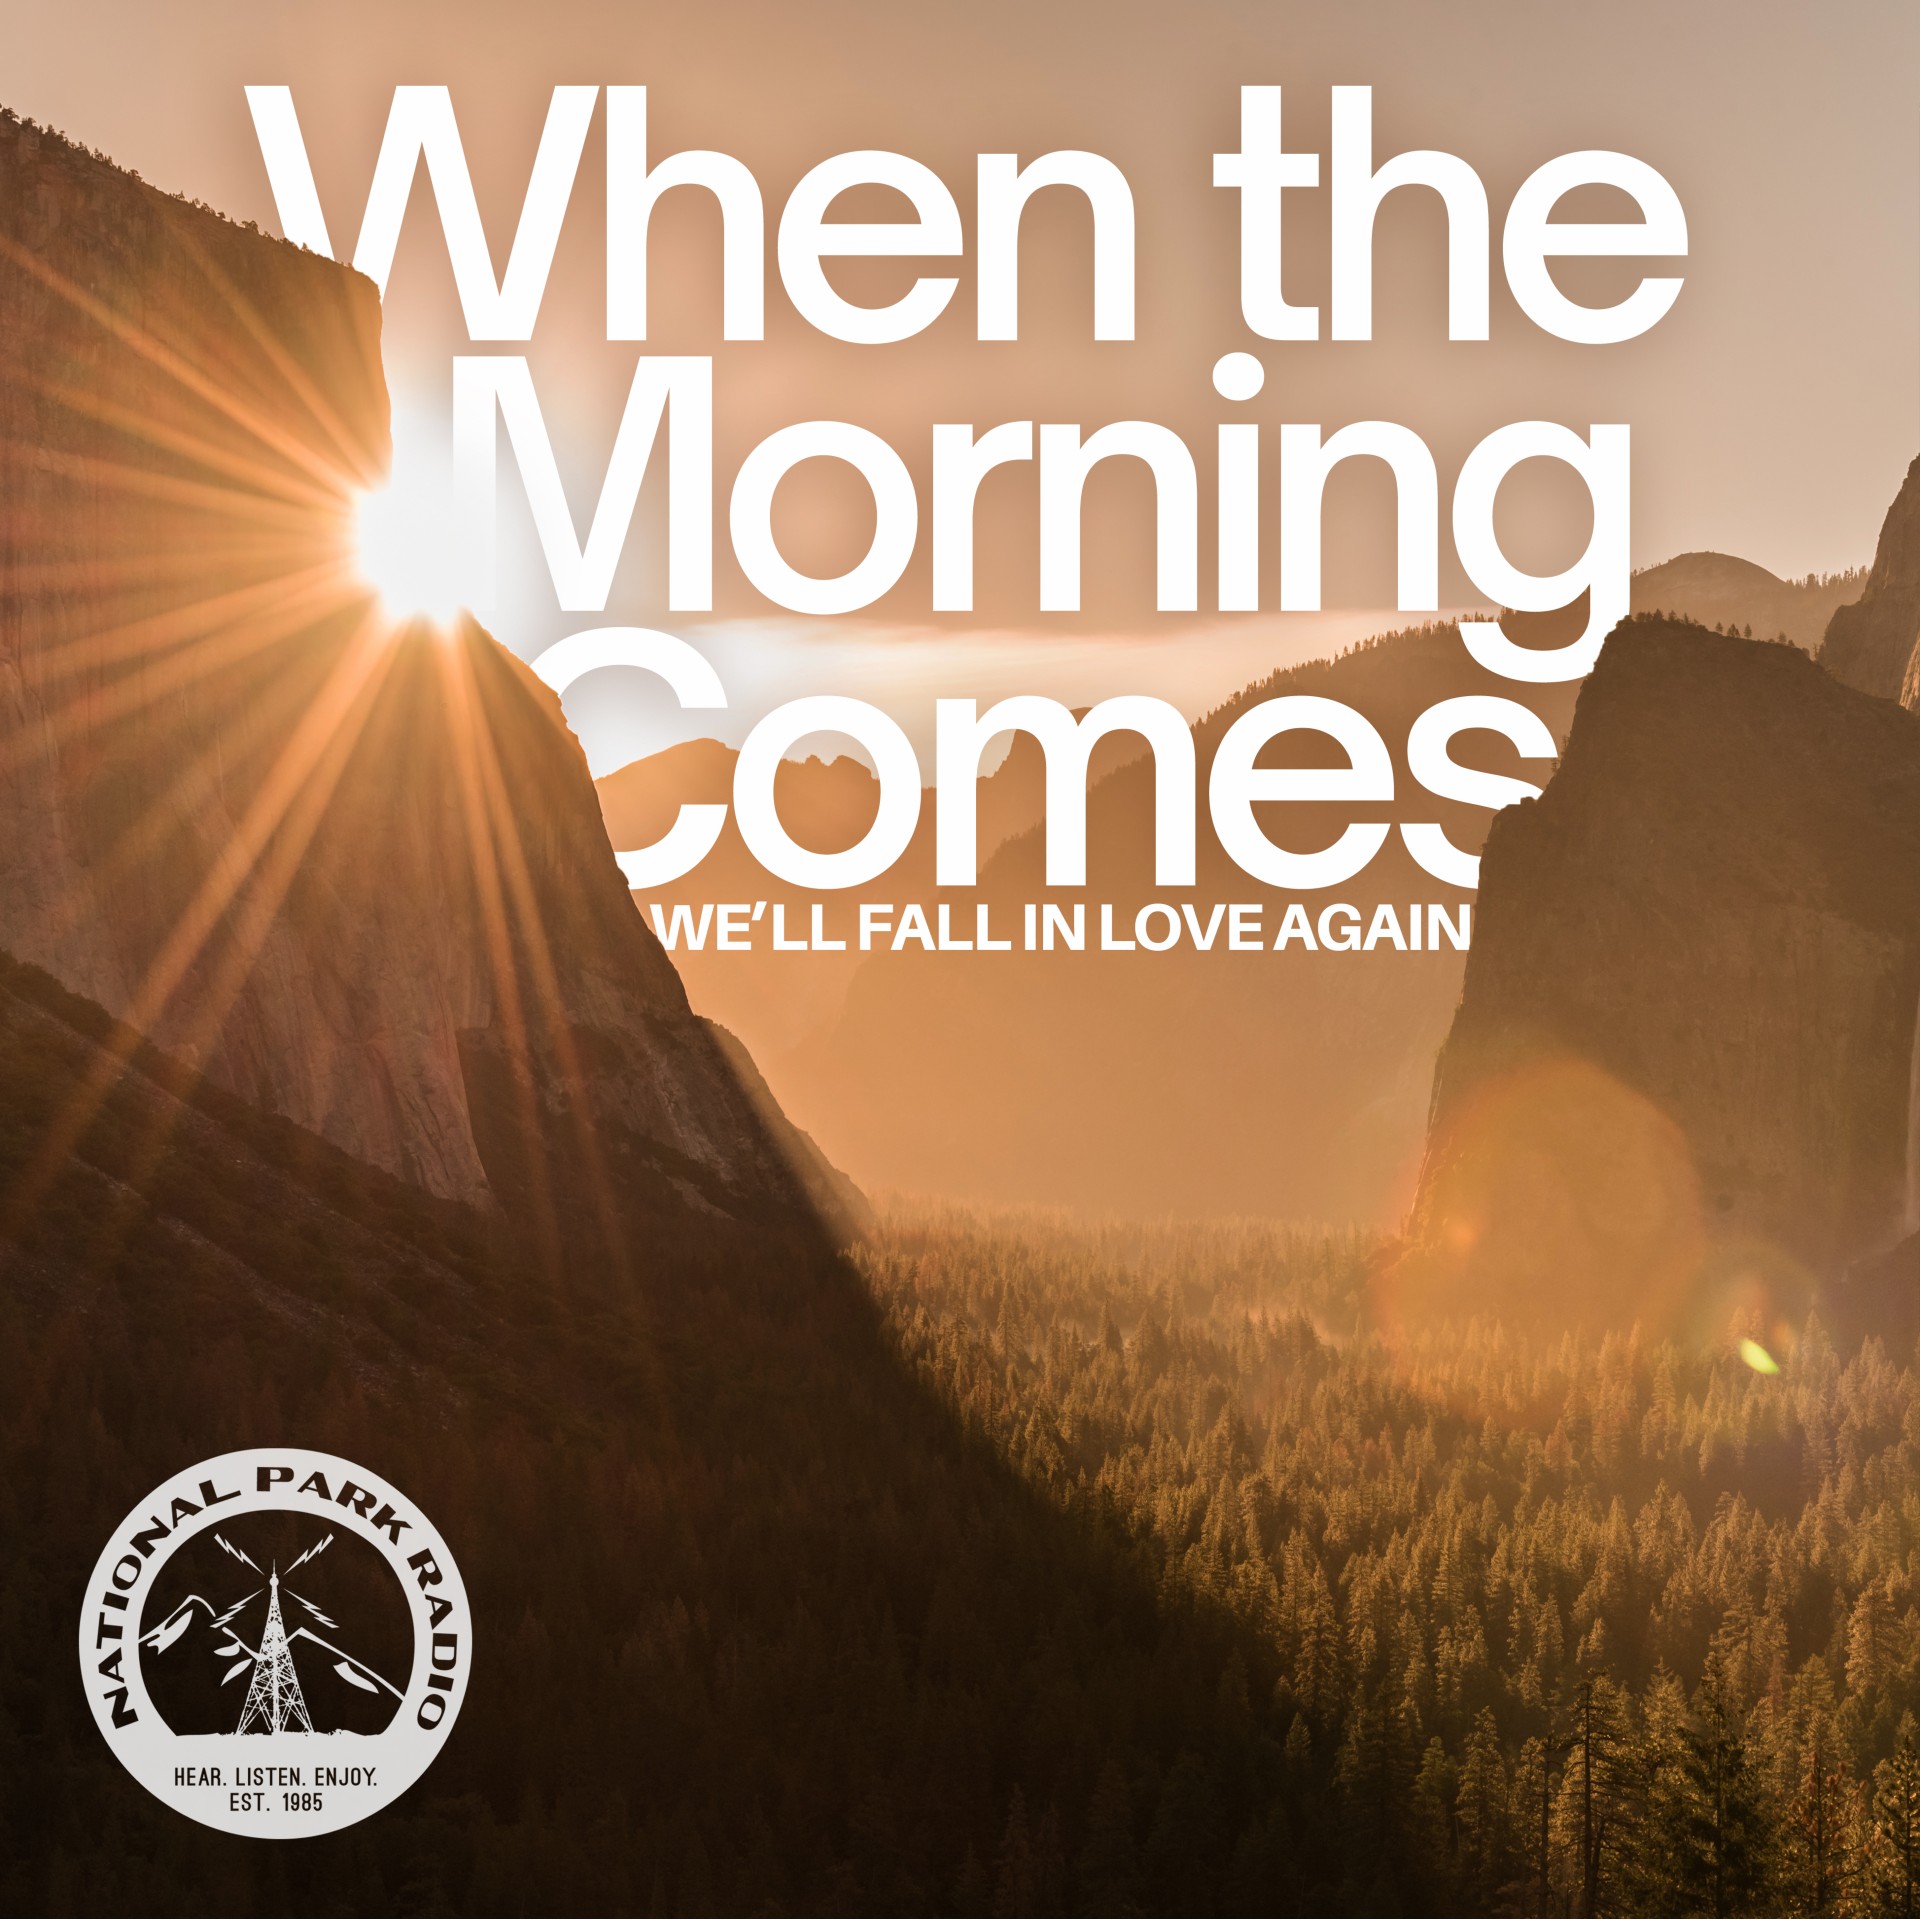 Artwork for the single “When The Morning Comes” by National Park Radio